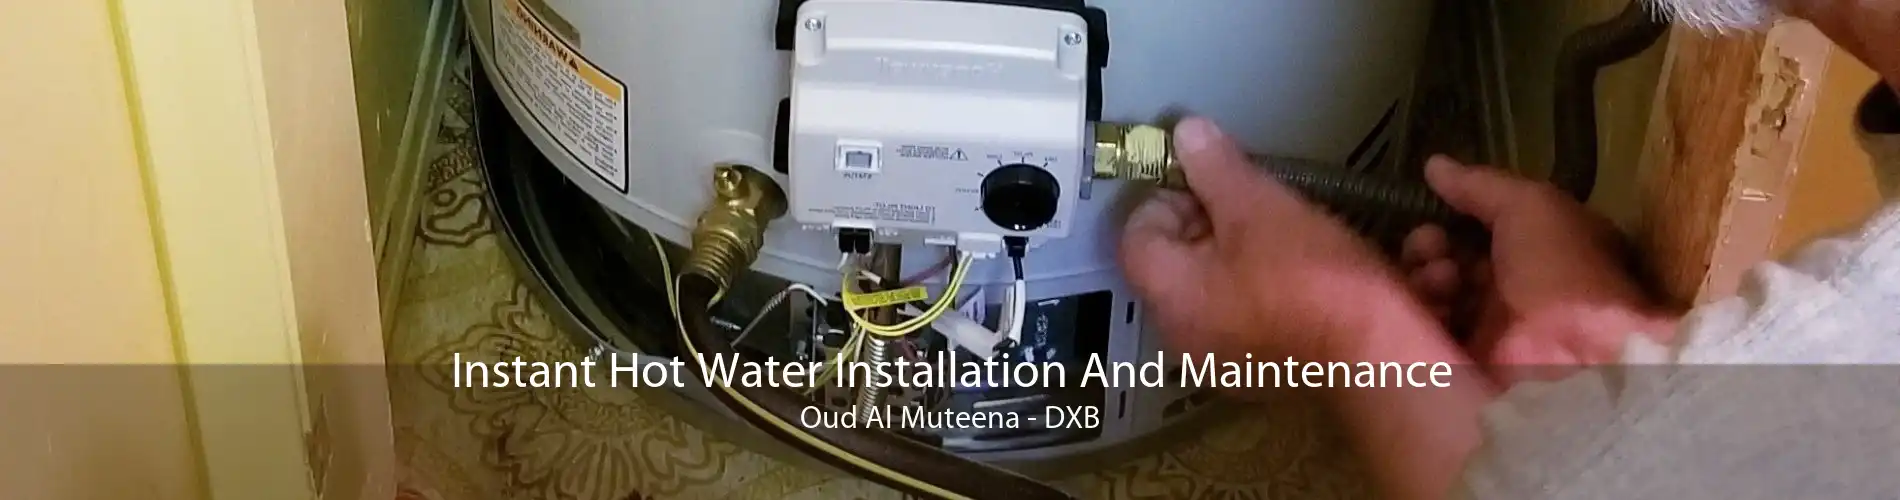 Instant Hot Water Installation And Maintenance Oud Al Muteena - DXB